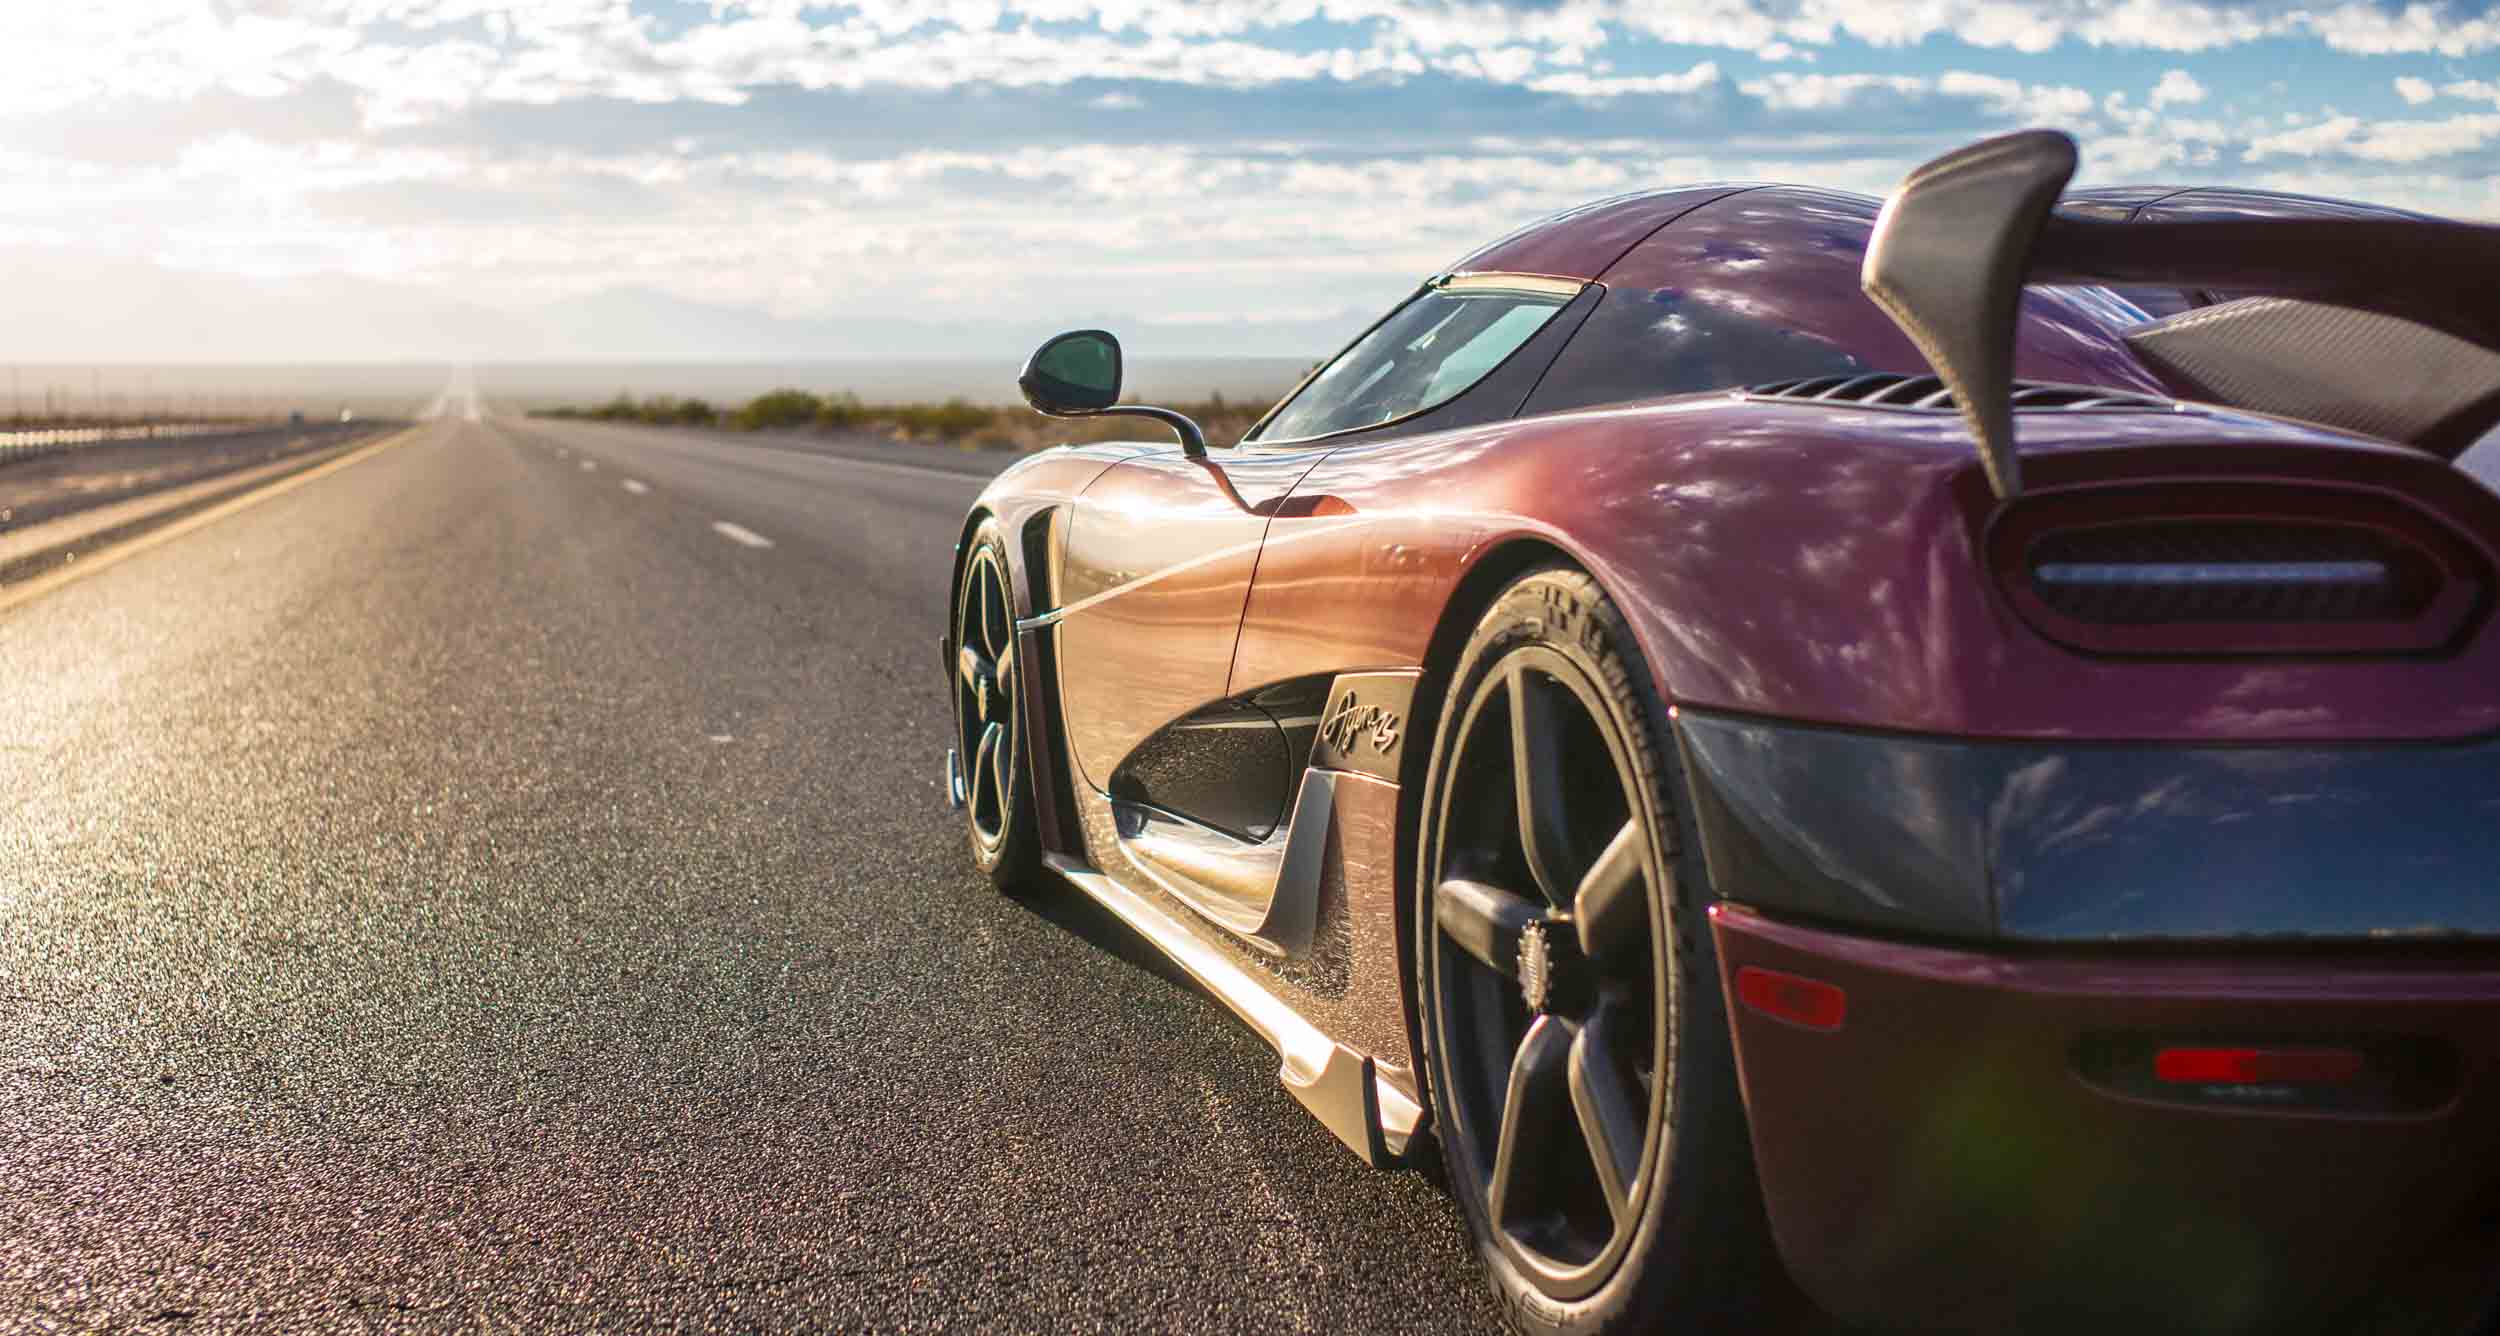 News: Koenigsegg – Record-Breaking Supercars Built with Qt